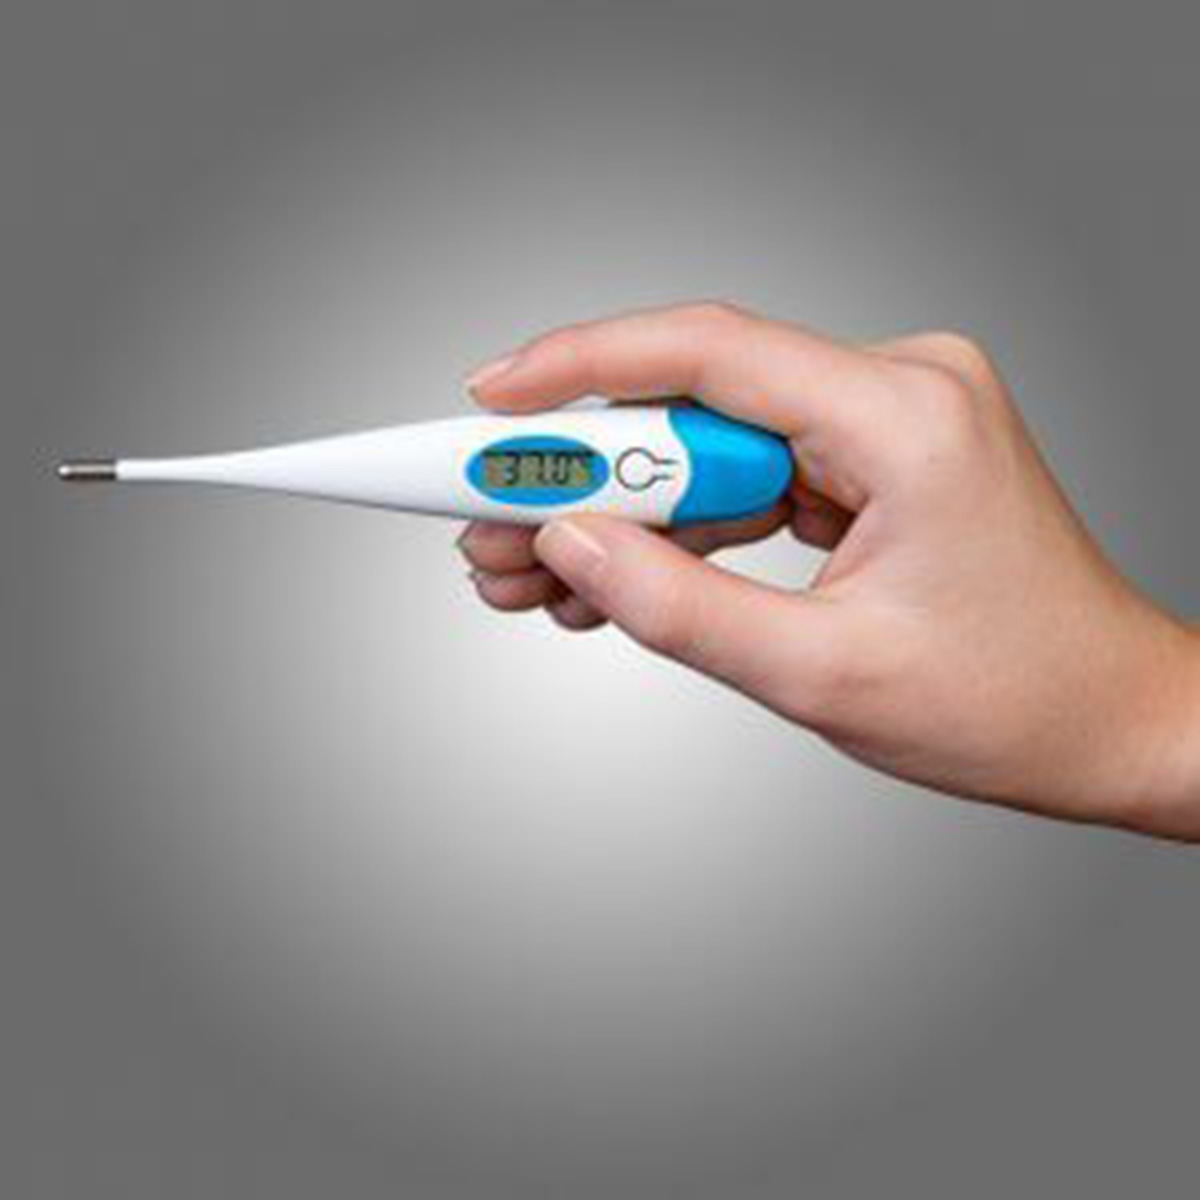 AERODIAGNOSTIC Digital Clinical Thermometer